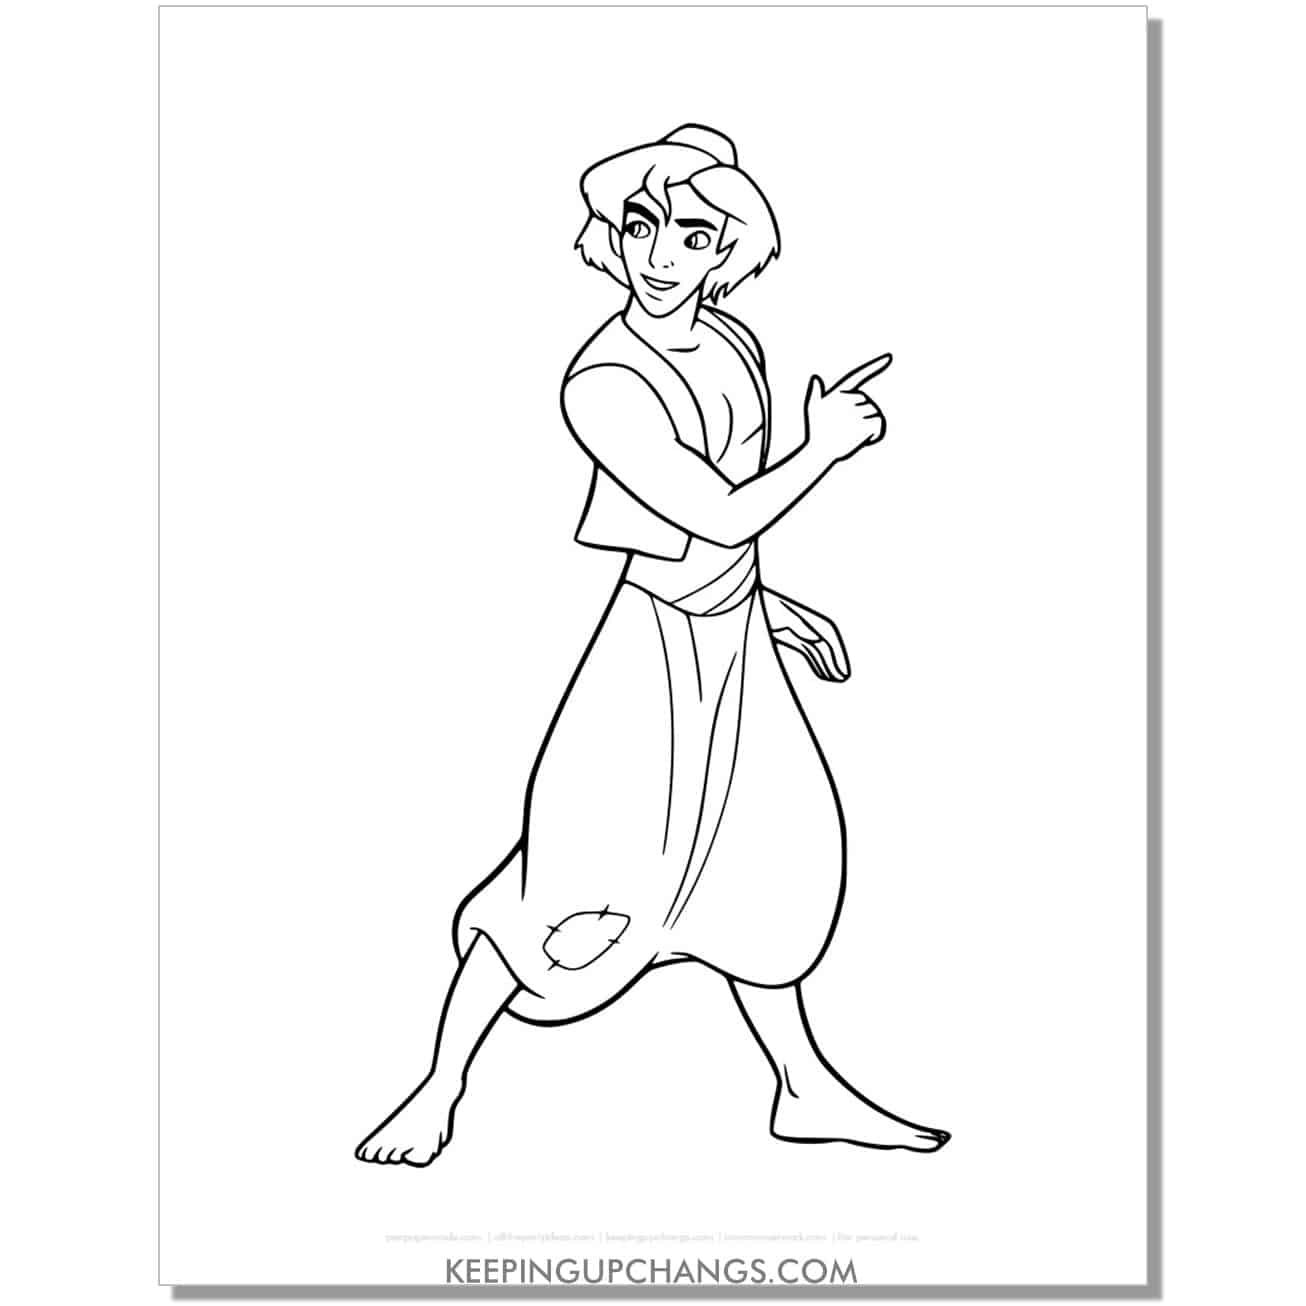 aladdin pointing finger to side coloring page, sheet.